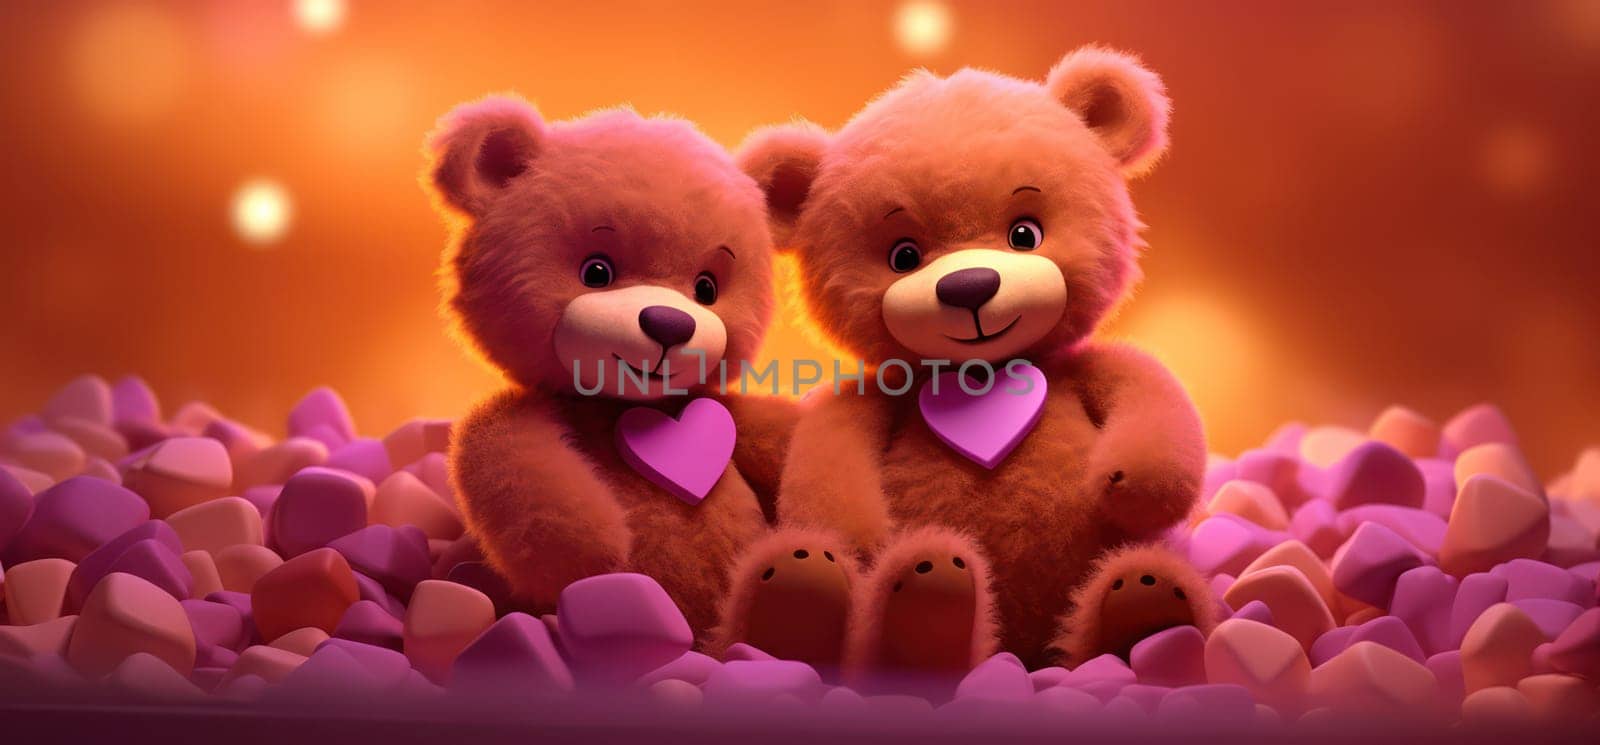 Cute Teddy Bear Love: Romantic Toy on Red Heart Background by Vichizh